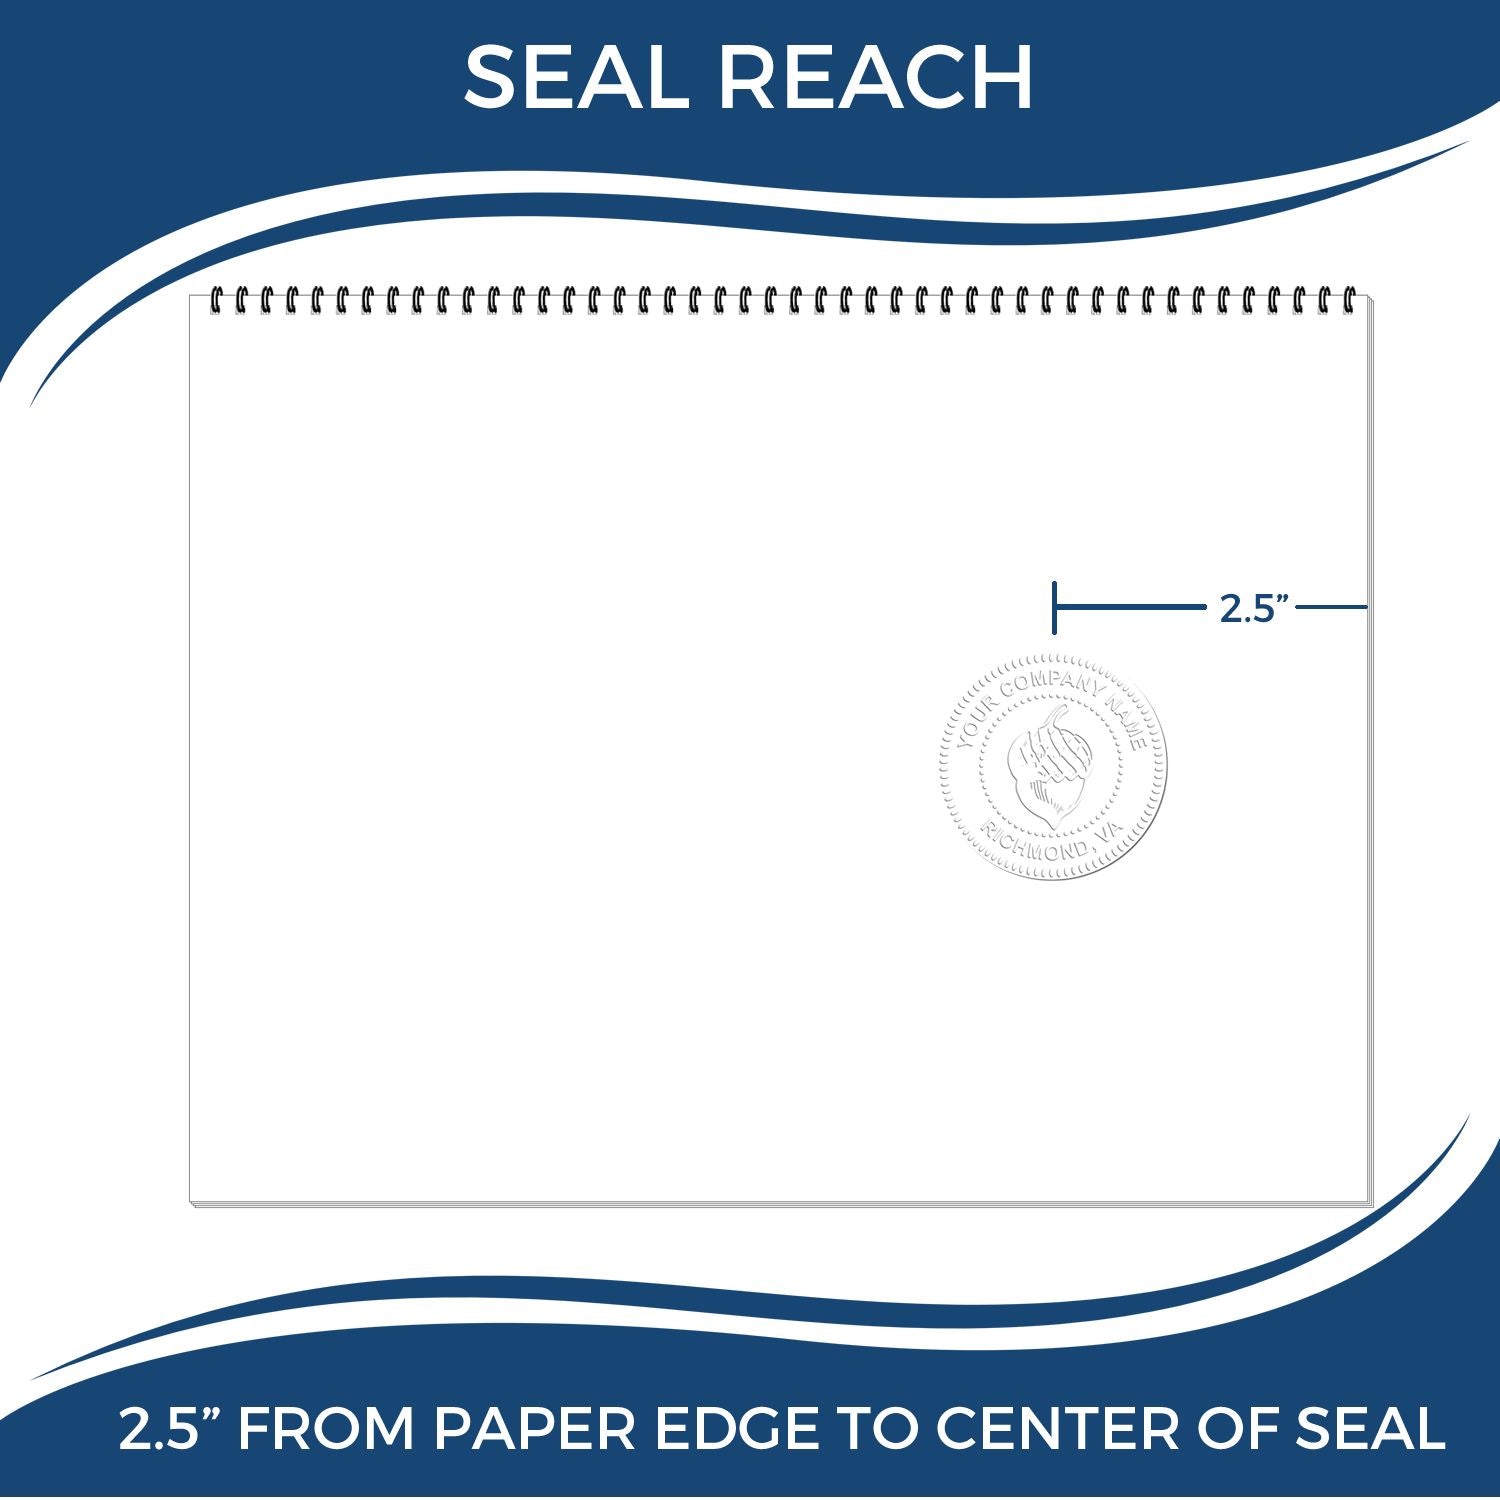 An infographic showing the seal reach which is represented by a ruler and a miniature seal image of the State of Mississippi Long Reach Architectural Embossing Seal